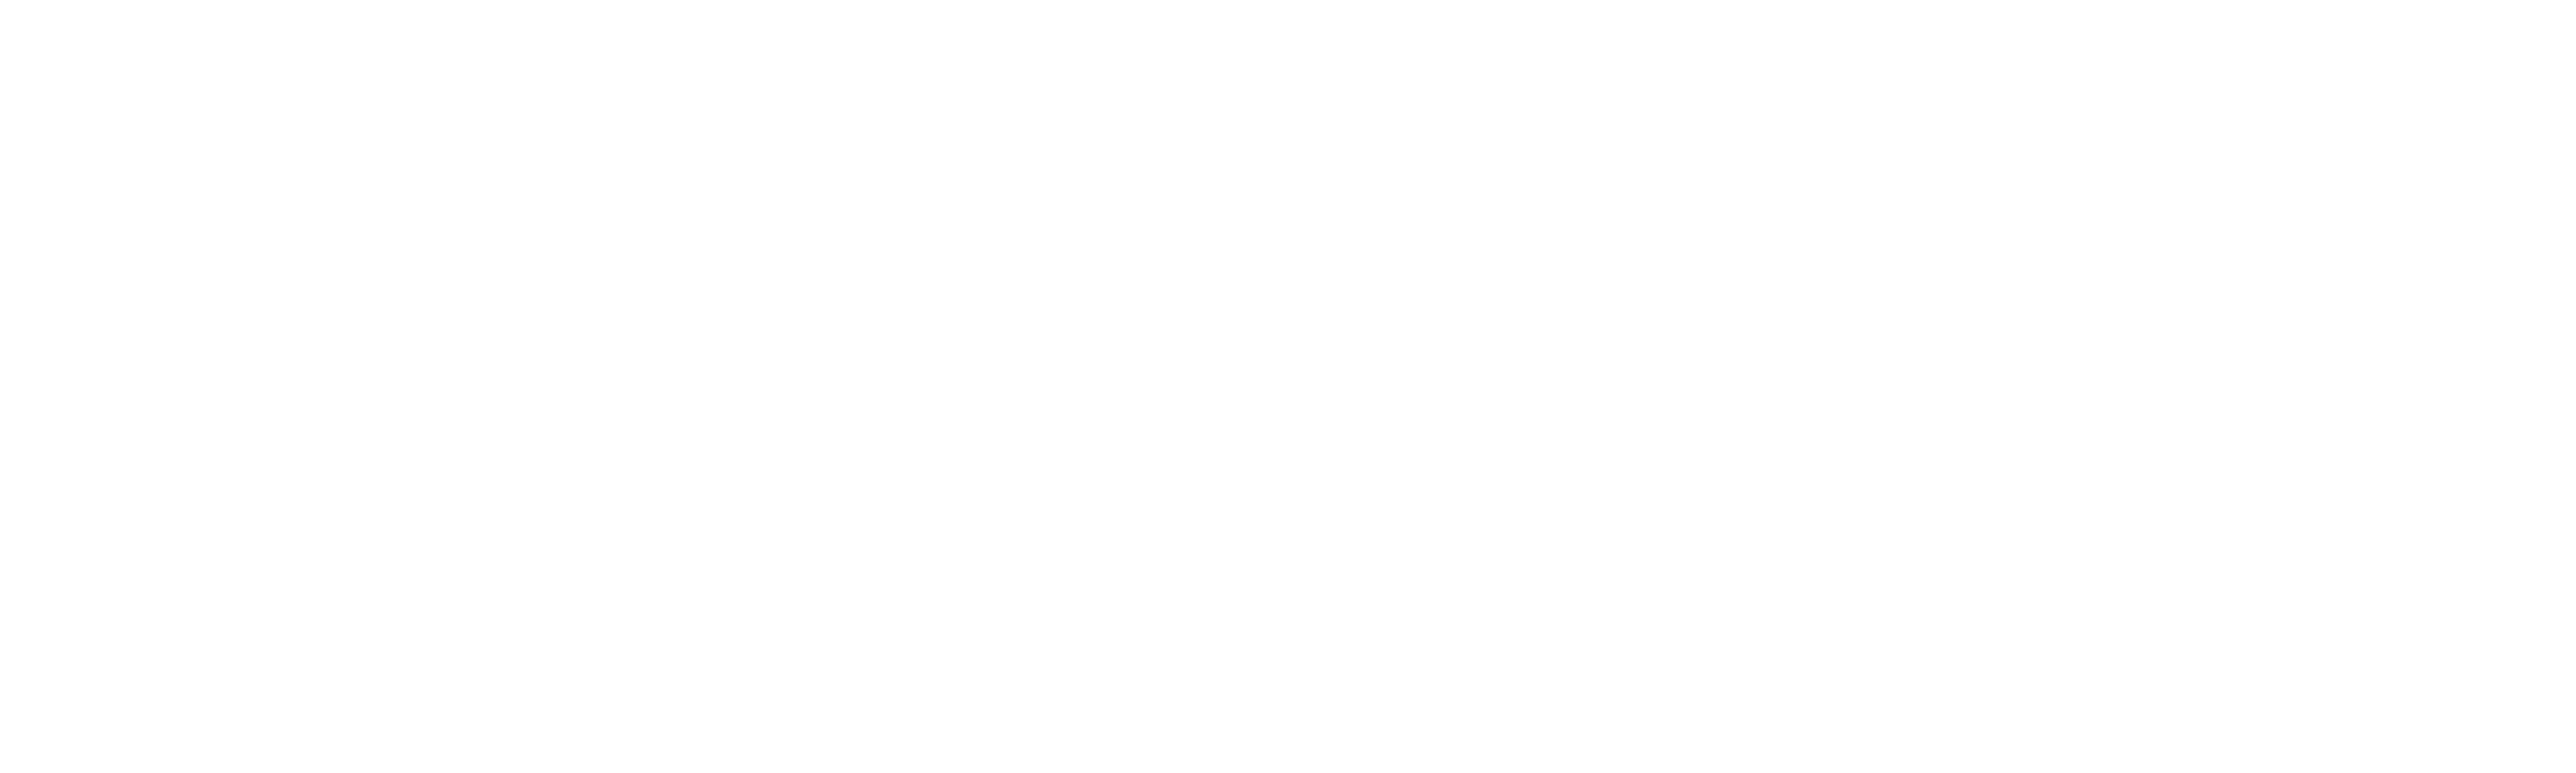 My Client Zone